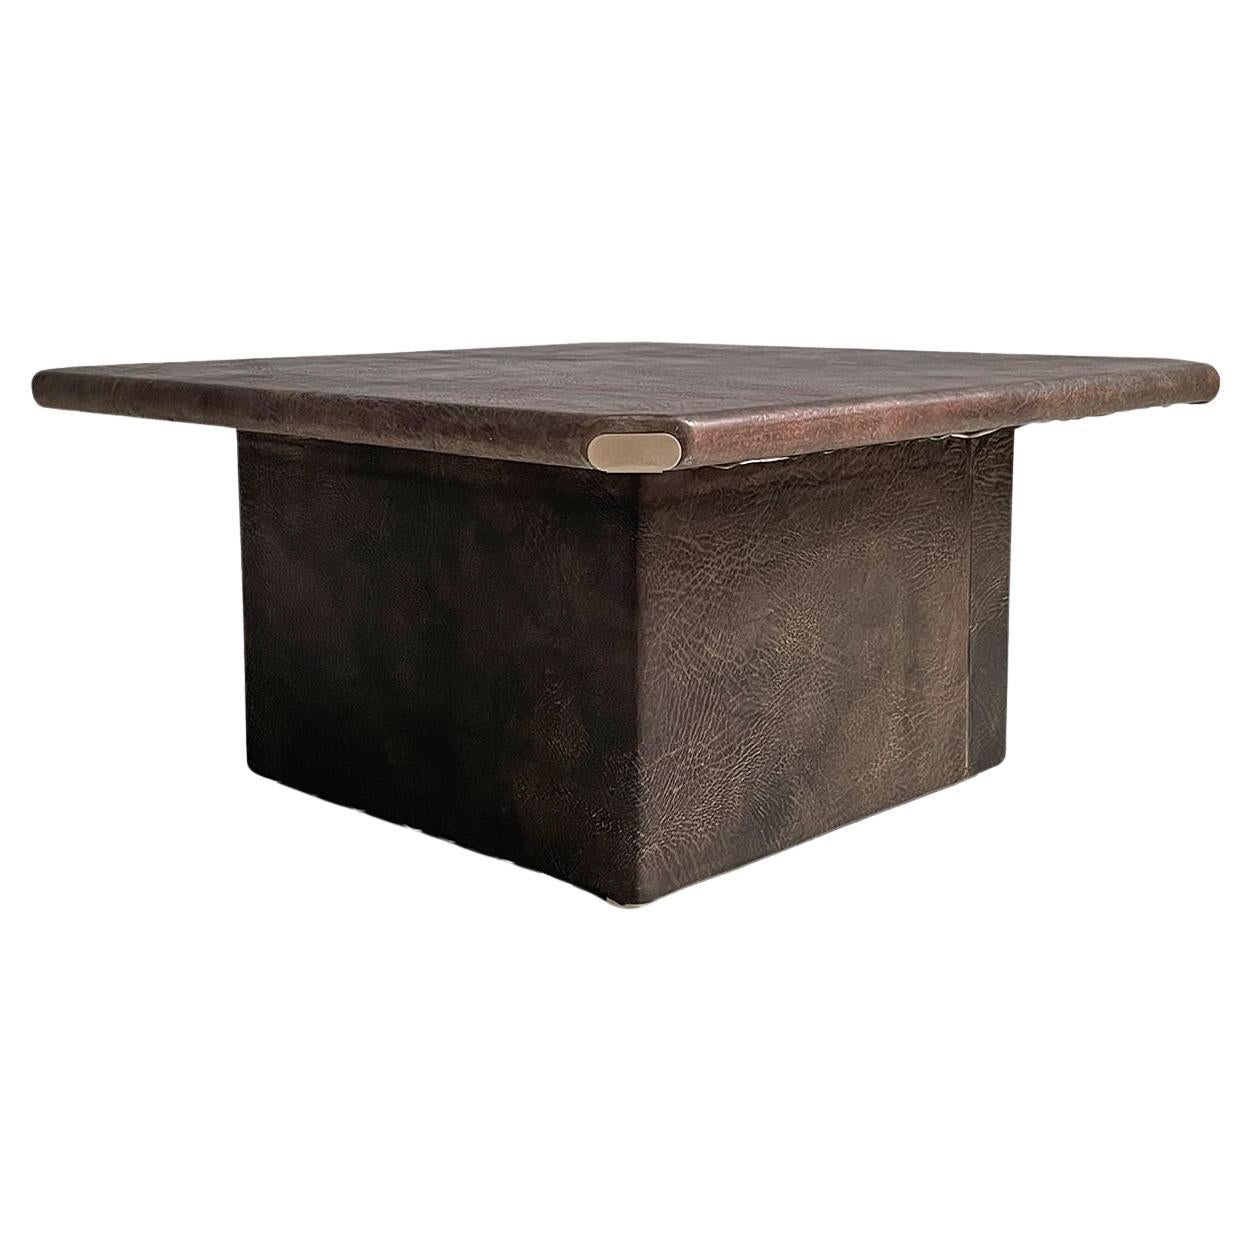 Italian modern black buffalo leather coffee table with metal details, 1970s For Sale